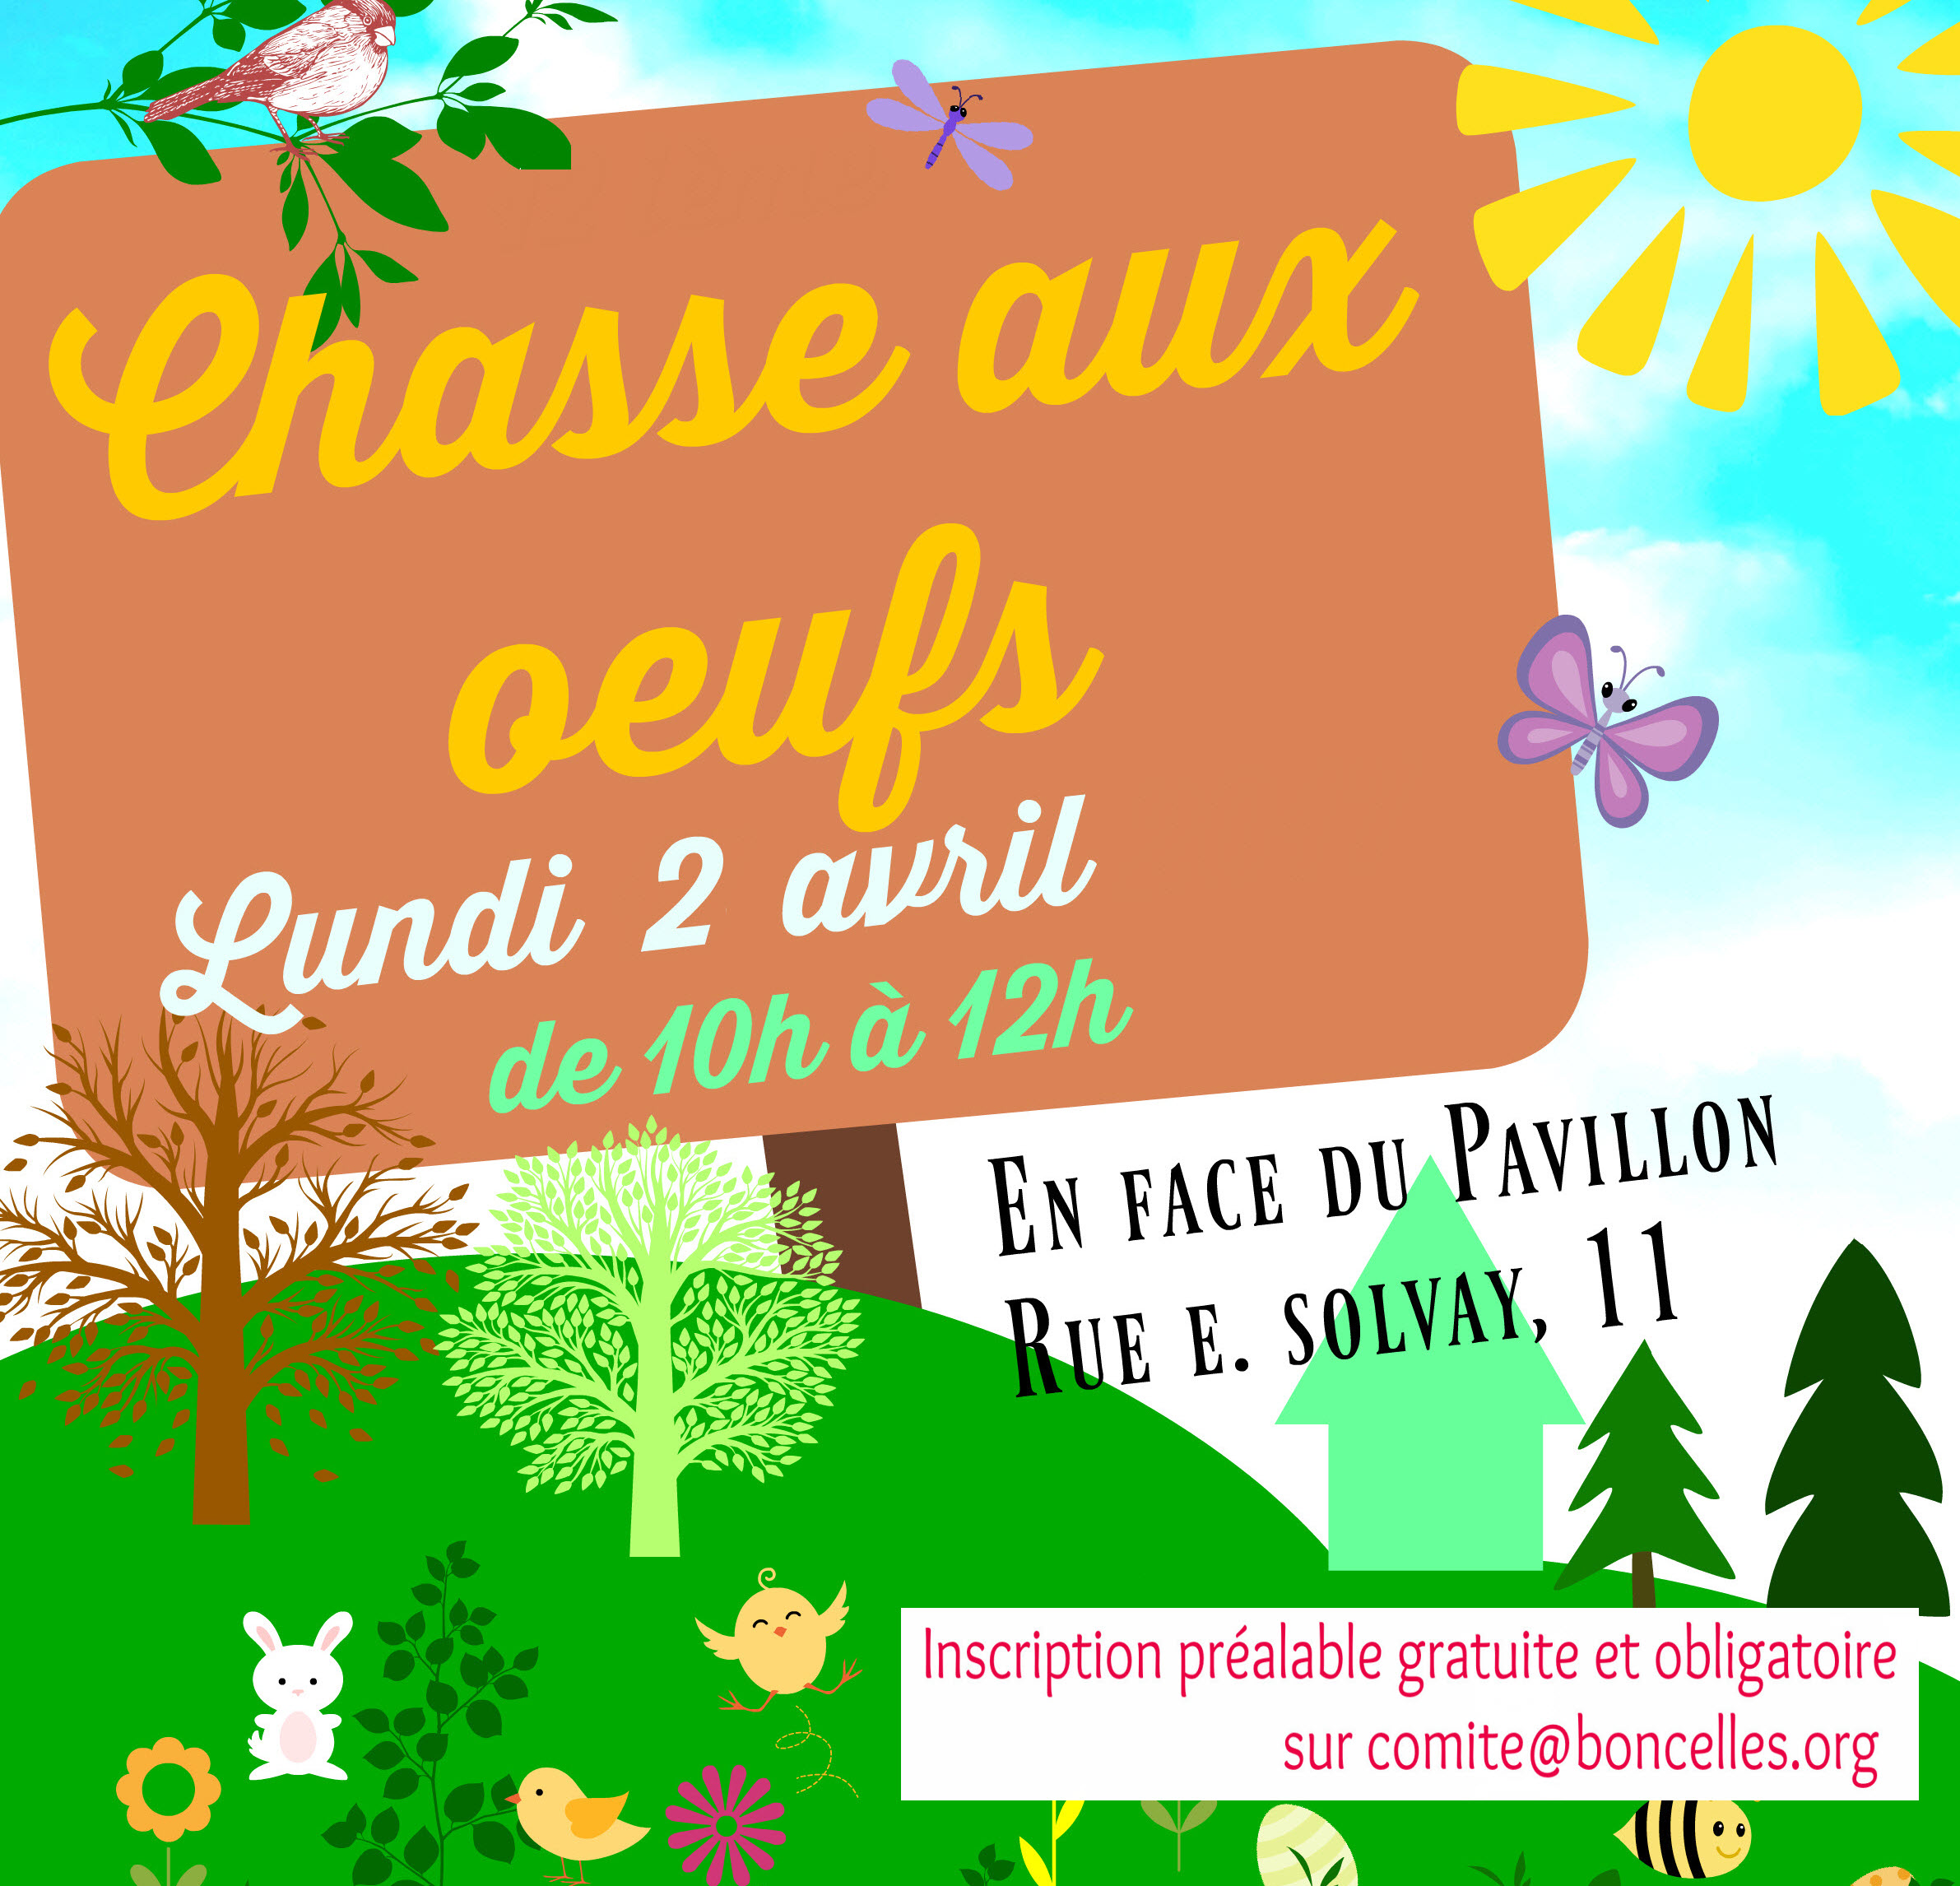 Chasse aux oeufs 2018